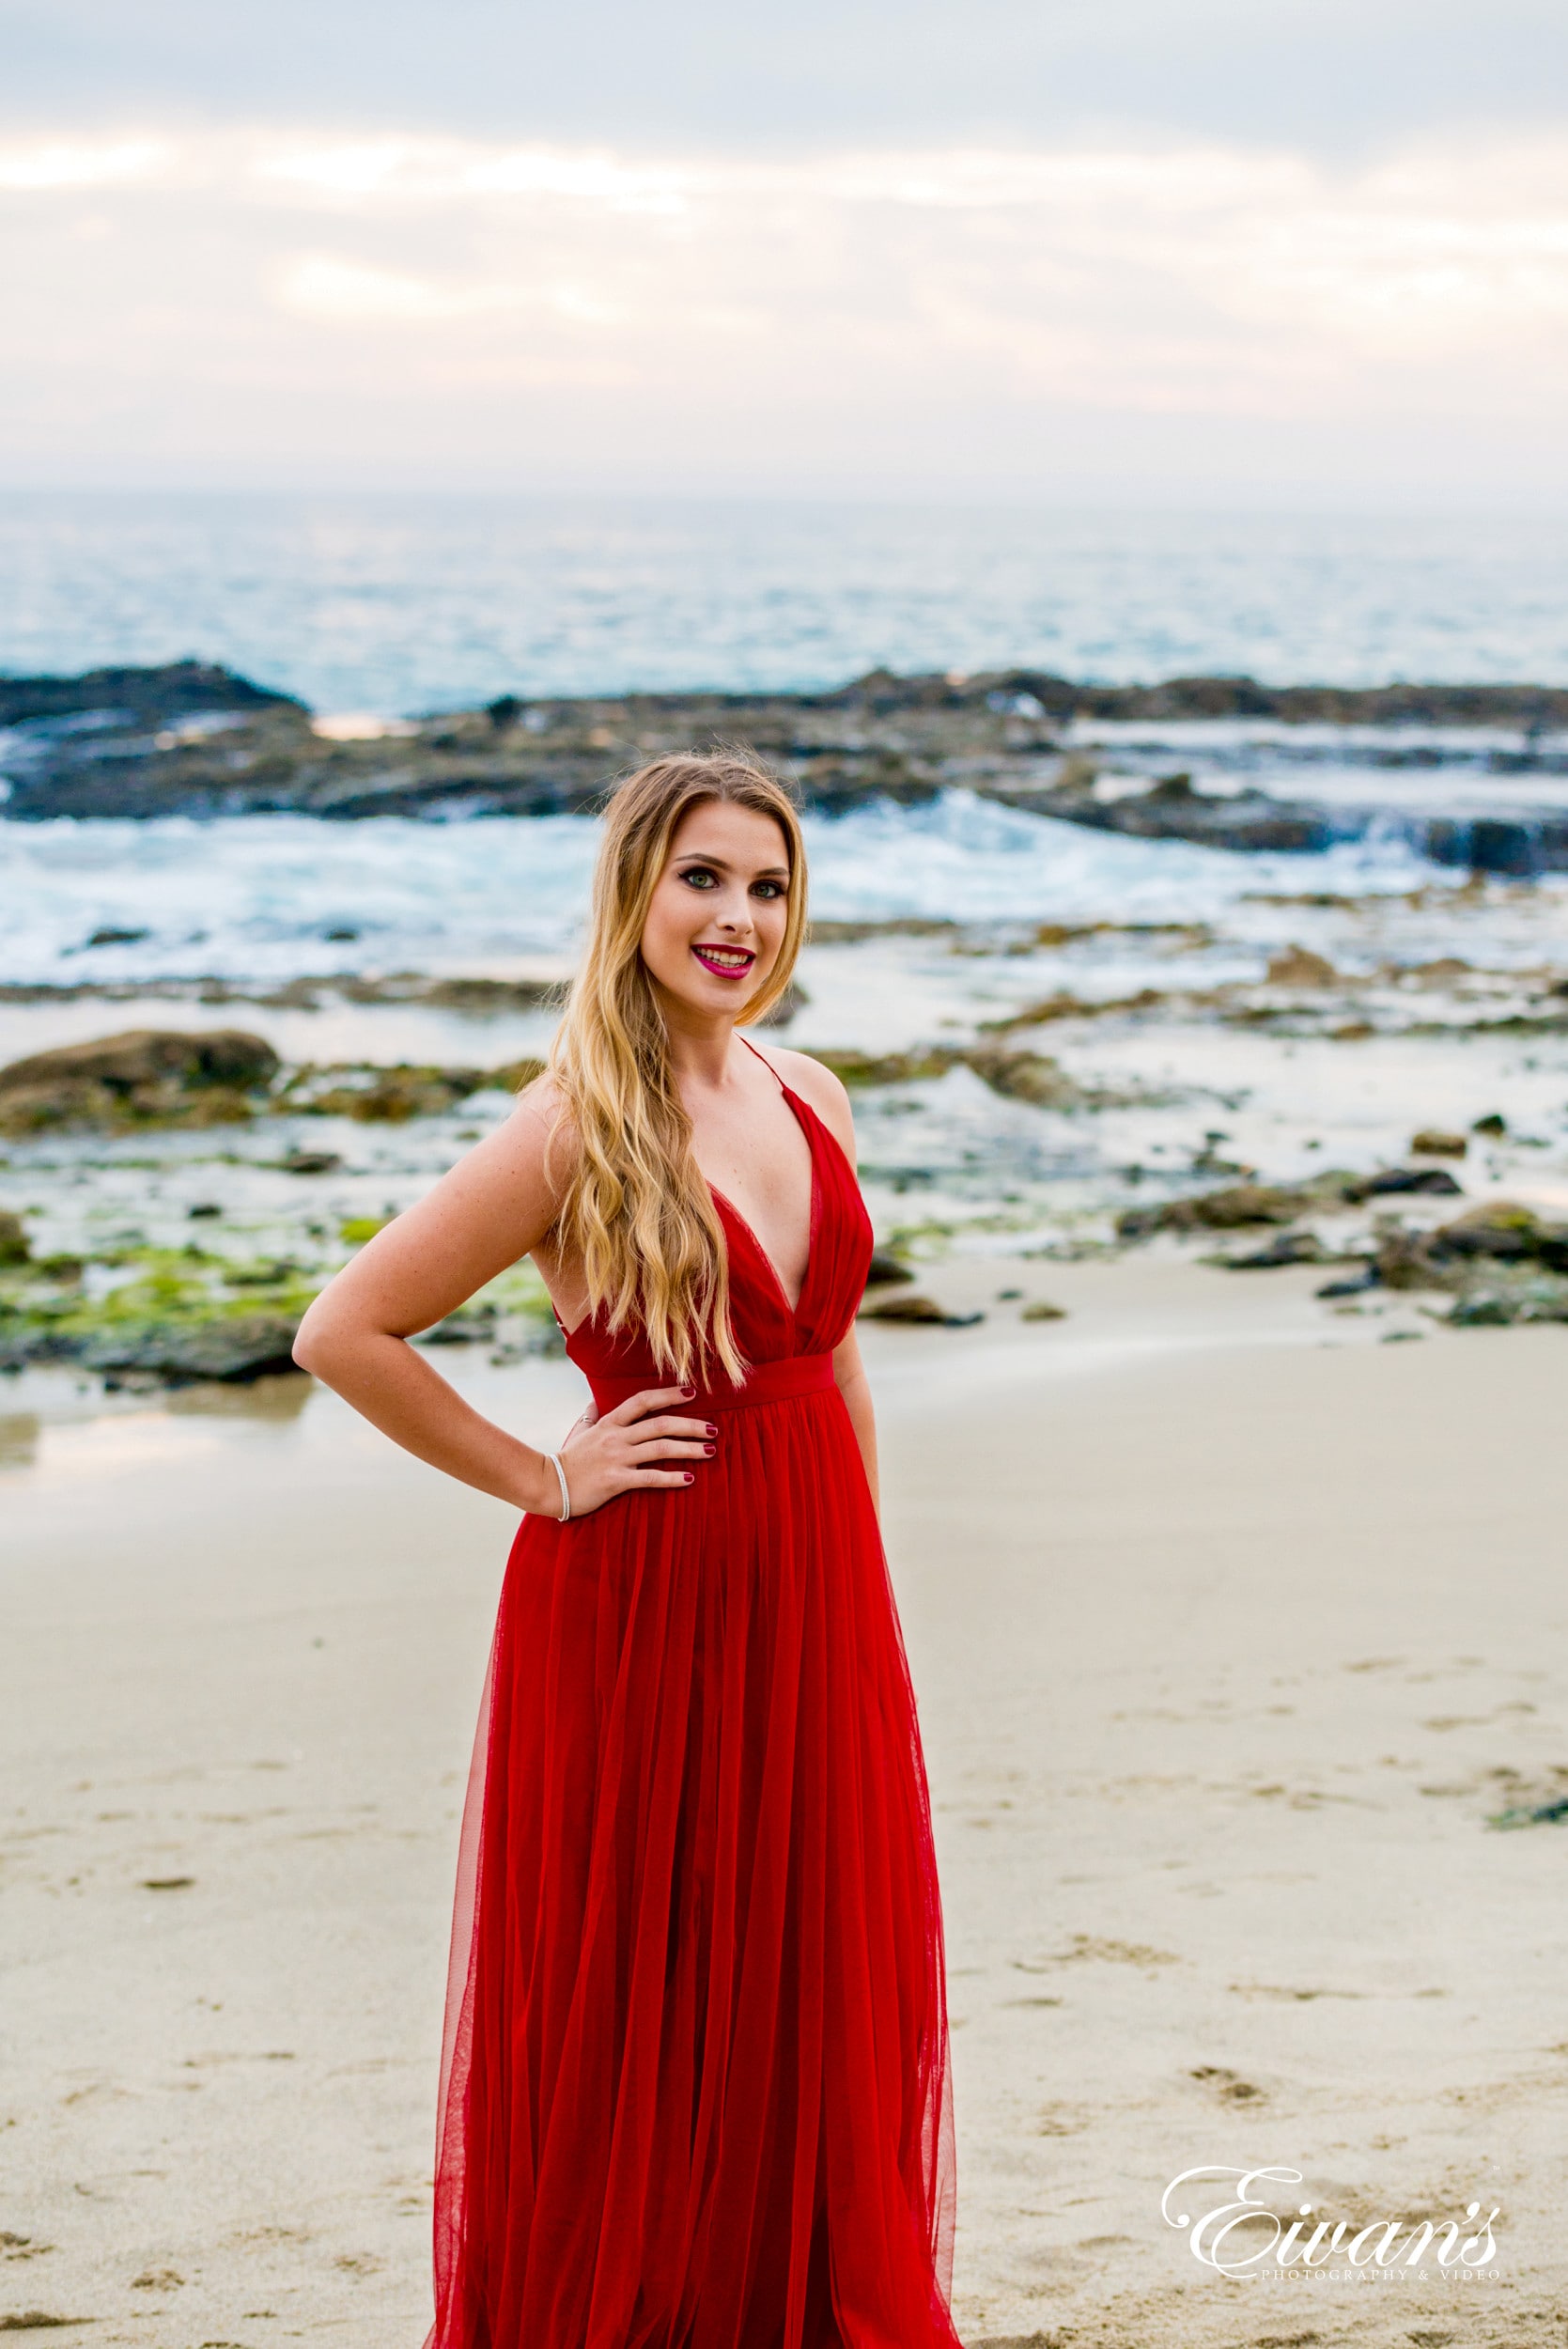 woman in red sleeveless dress standing on beach during daytime